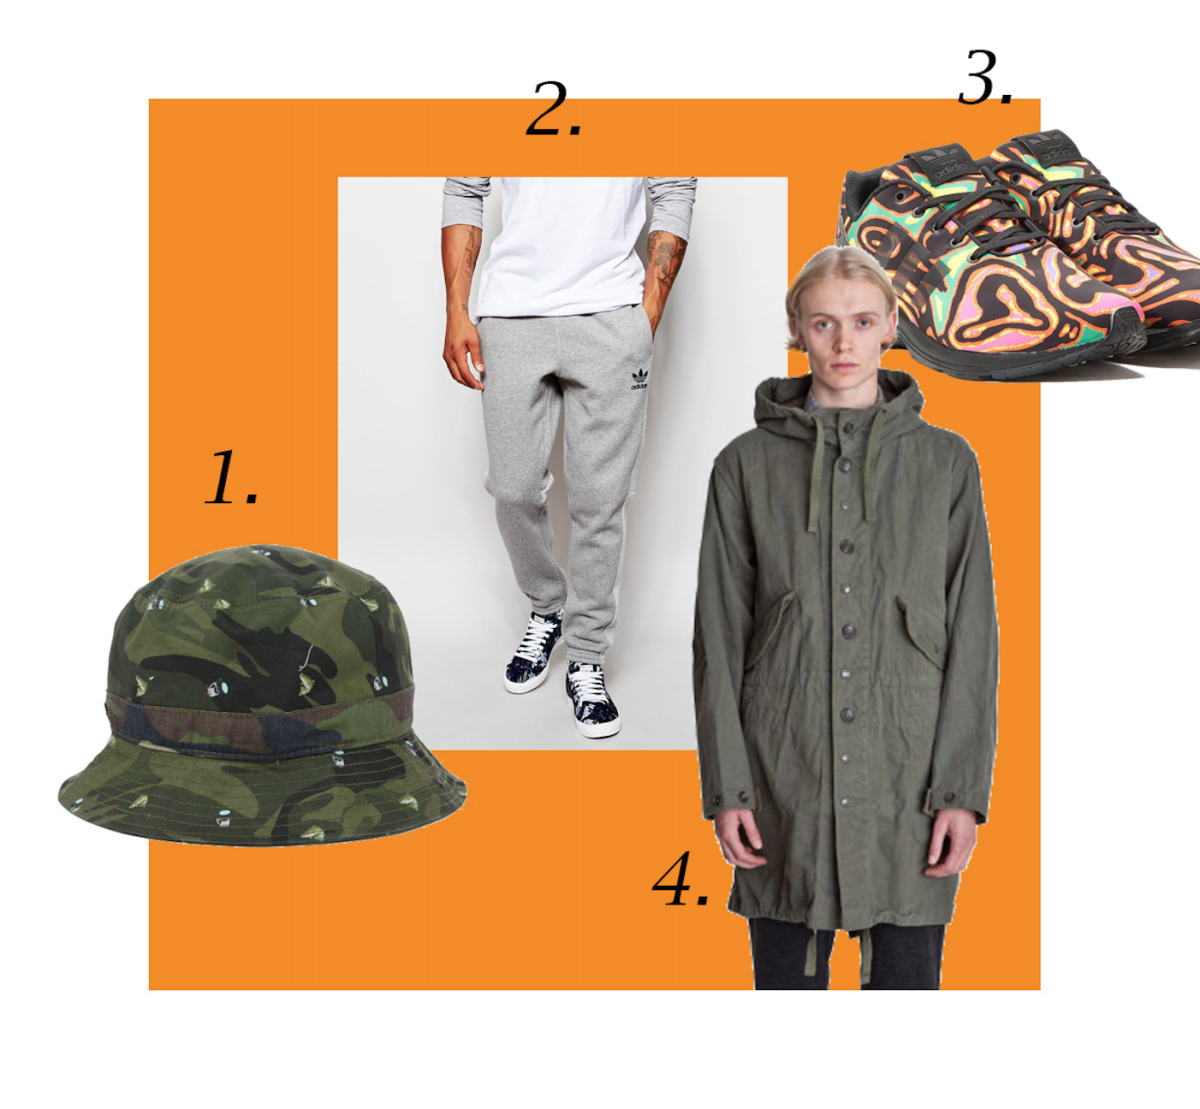 1. Trout bucket hat, $5, available at Lids; 2. Adidas Originals trackpants with panels, $73, available at Asos; 3. Jeremy Scott for Adidas sneakers, € 169, available at Allike; 4. Highland Park Olive Engineered Garments, $640, available at Tres Bien.